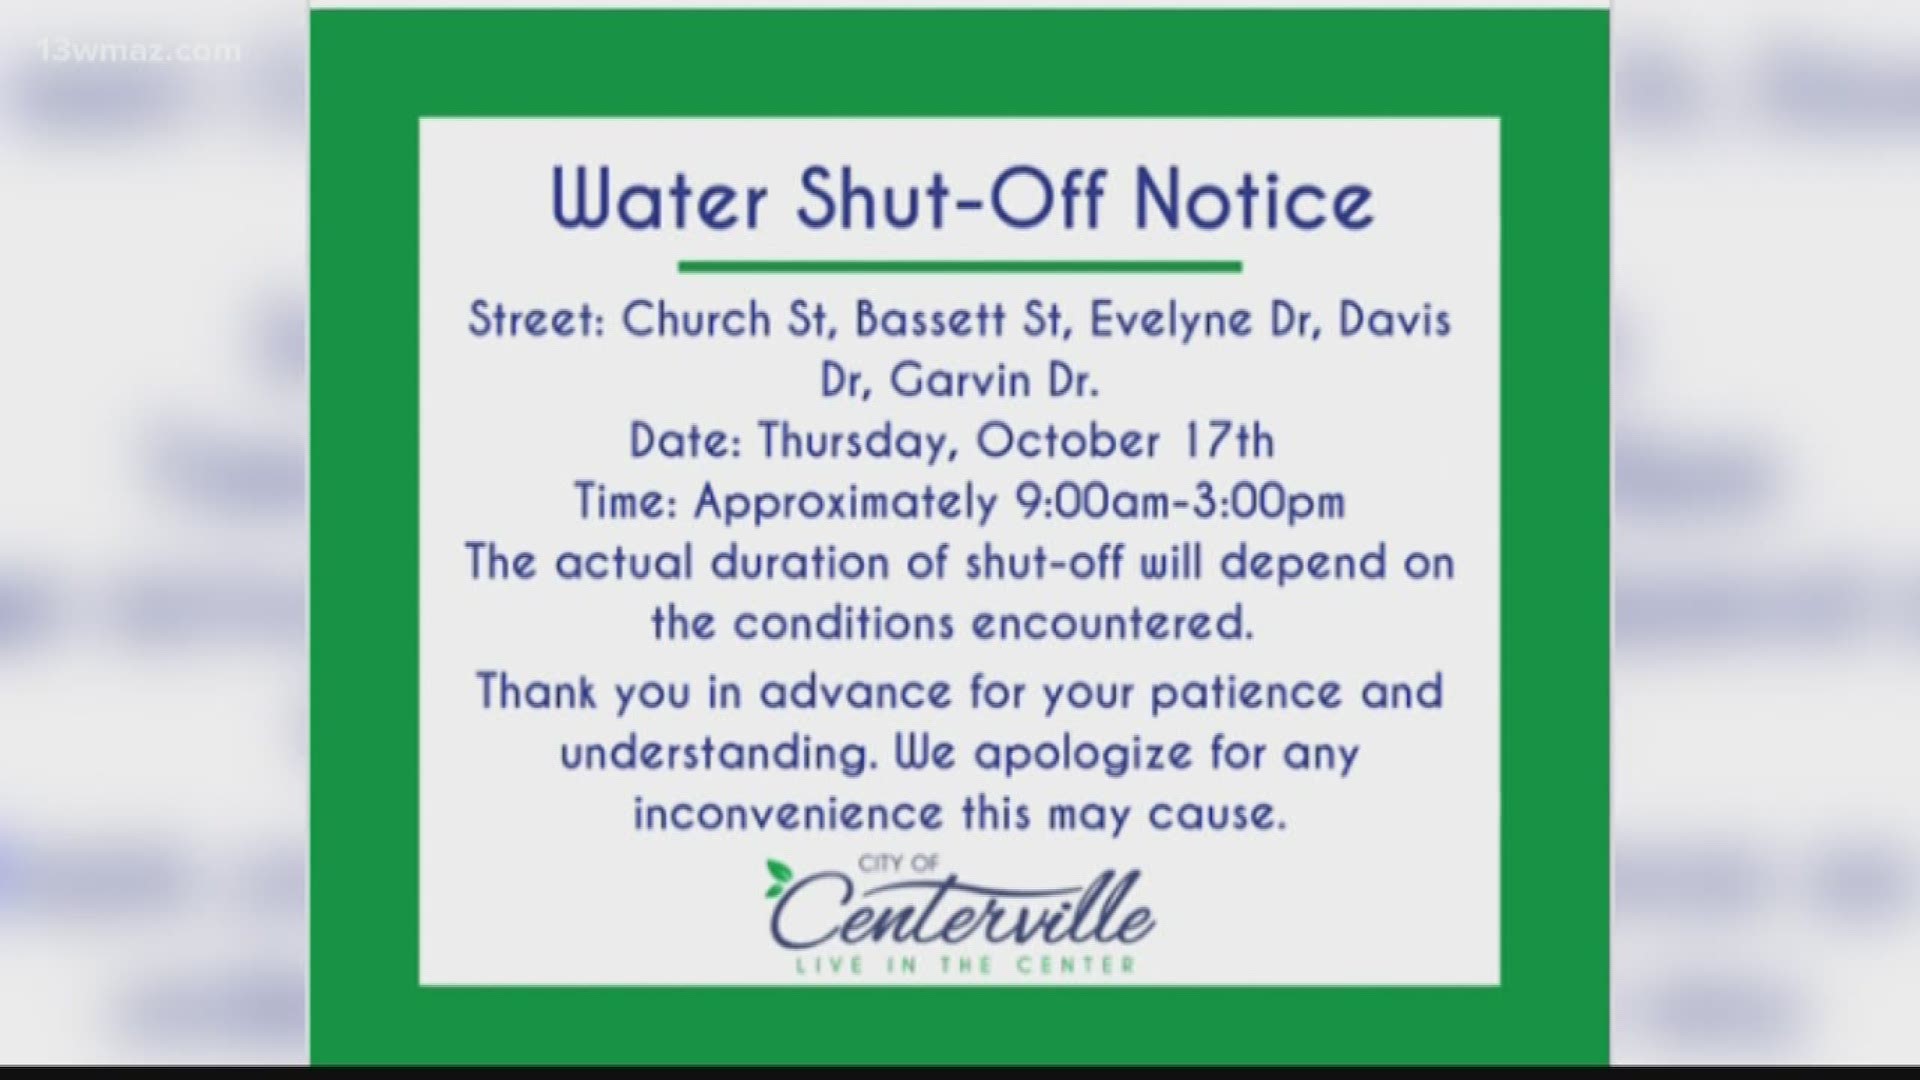 Centerville roads to be impacted by water shutoff